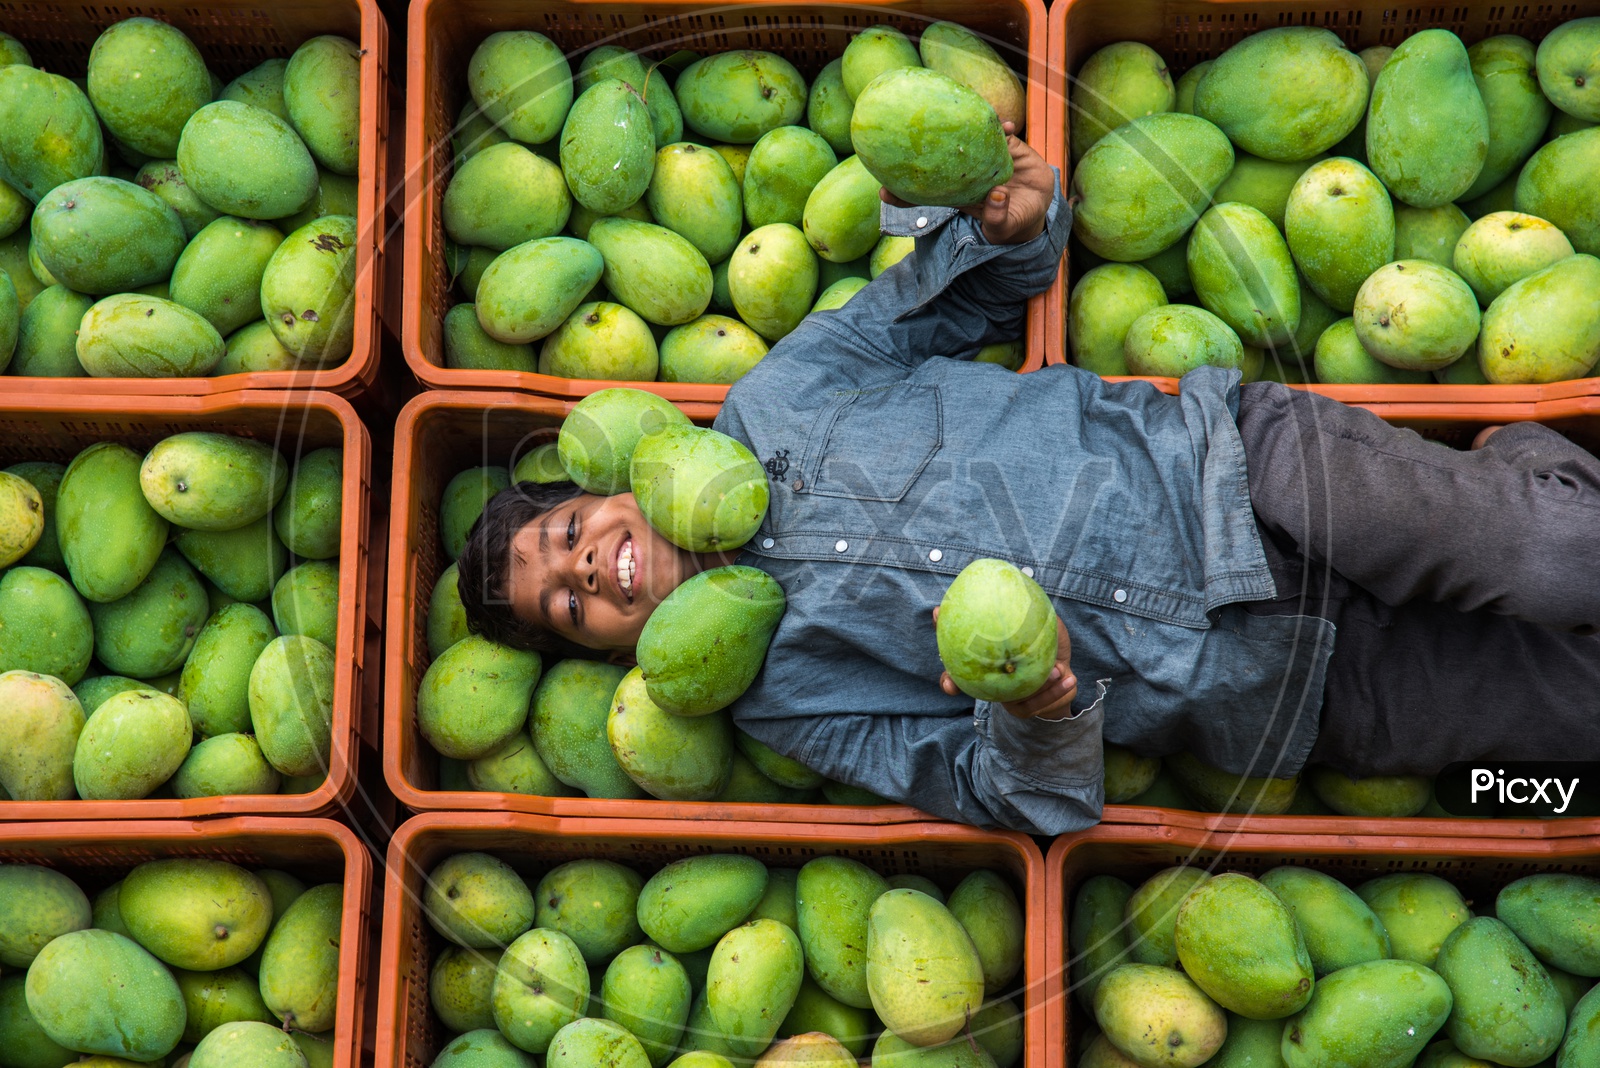 A kid posing to camera with their Mango yield at Kothapet Fruit Market.